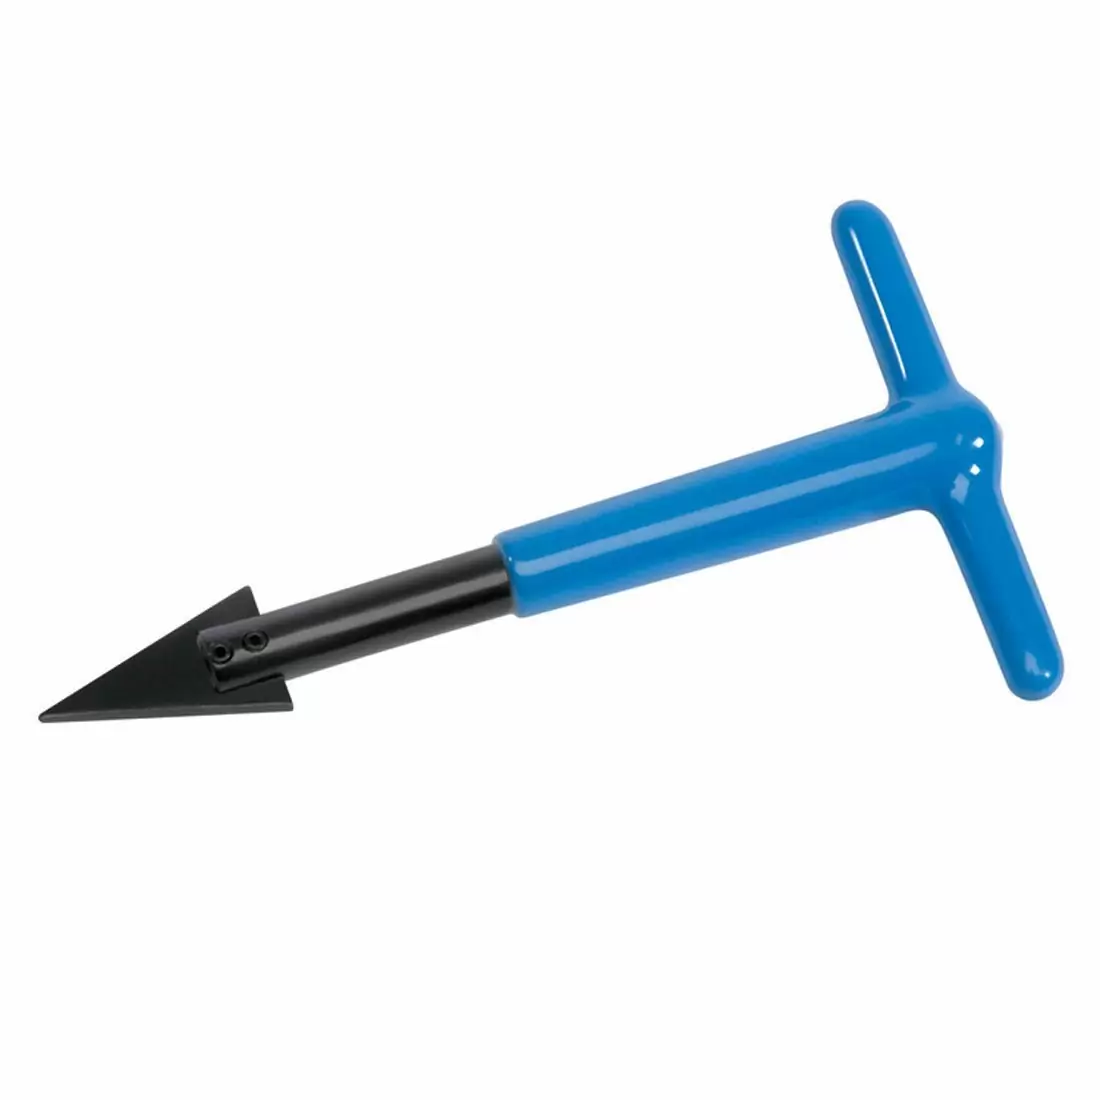 Spiral screw remover tool No.3 M11 - M24 / 3/8